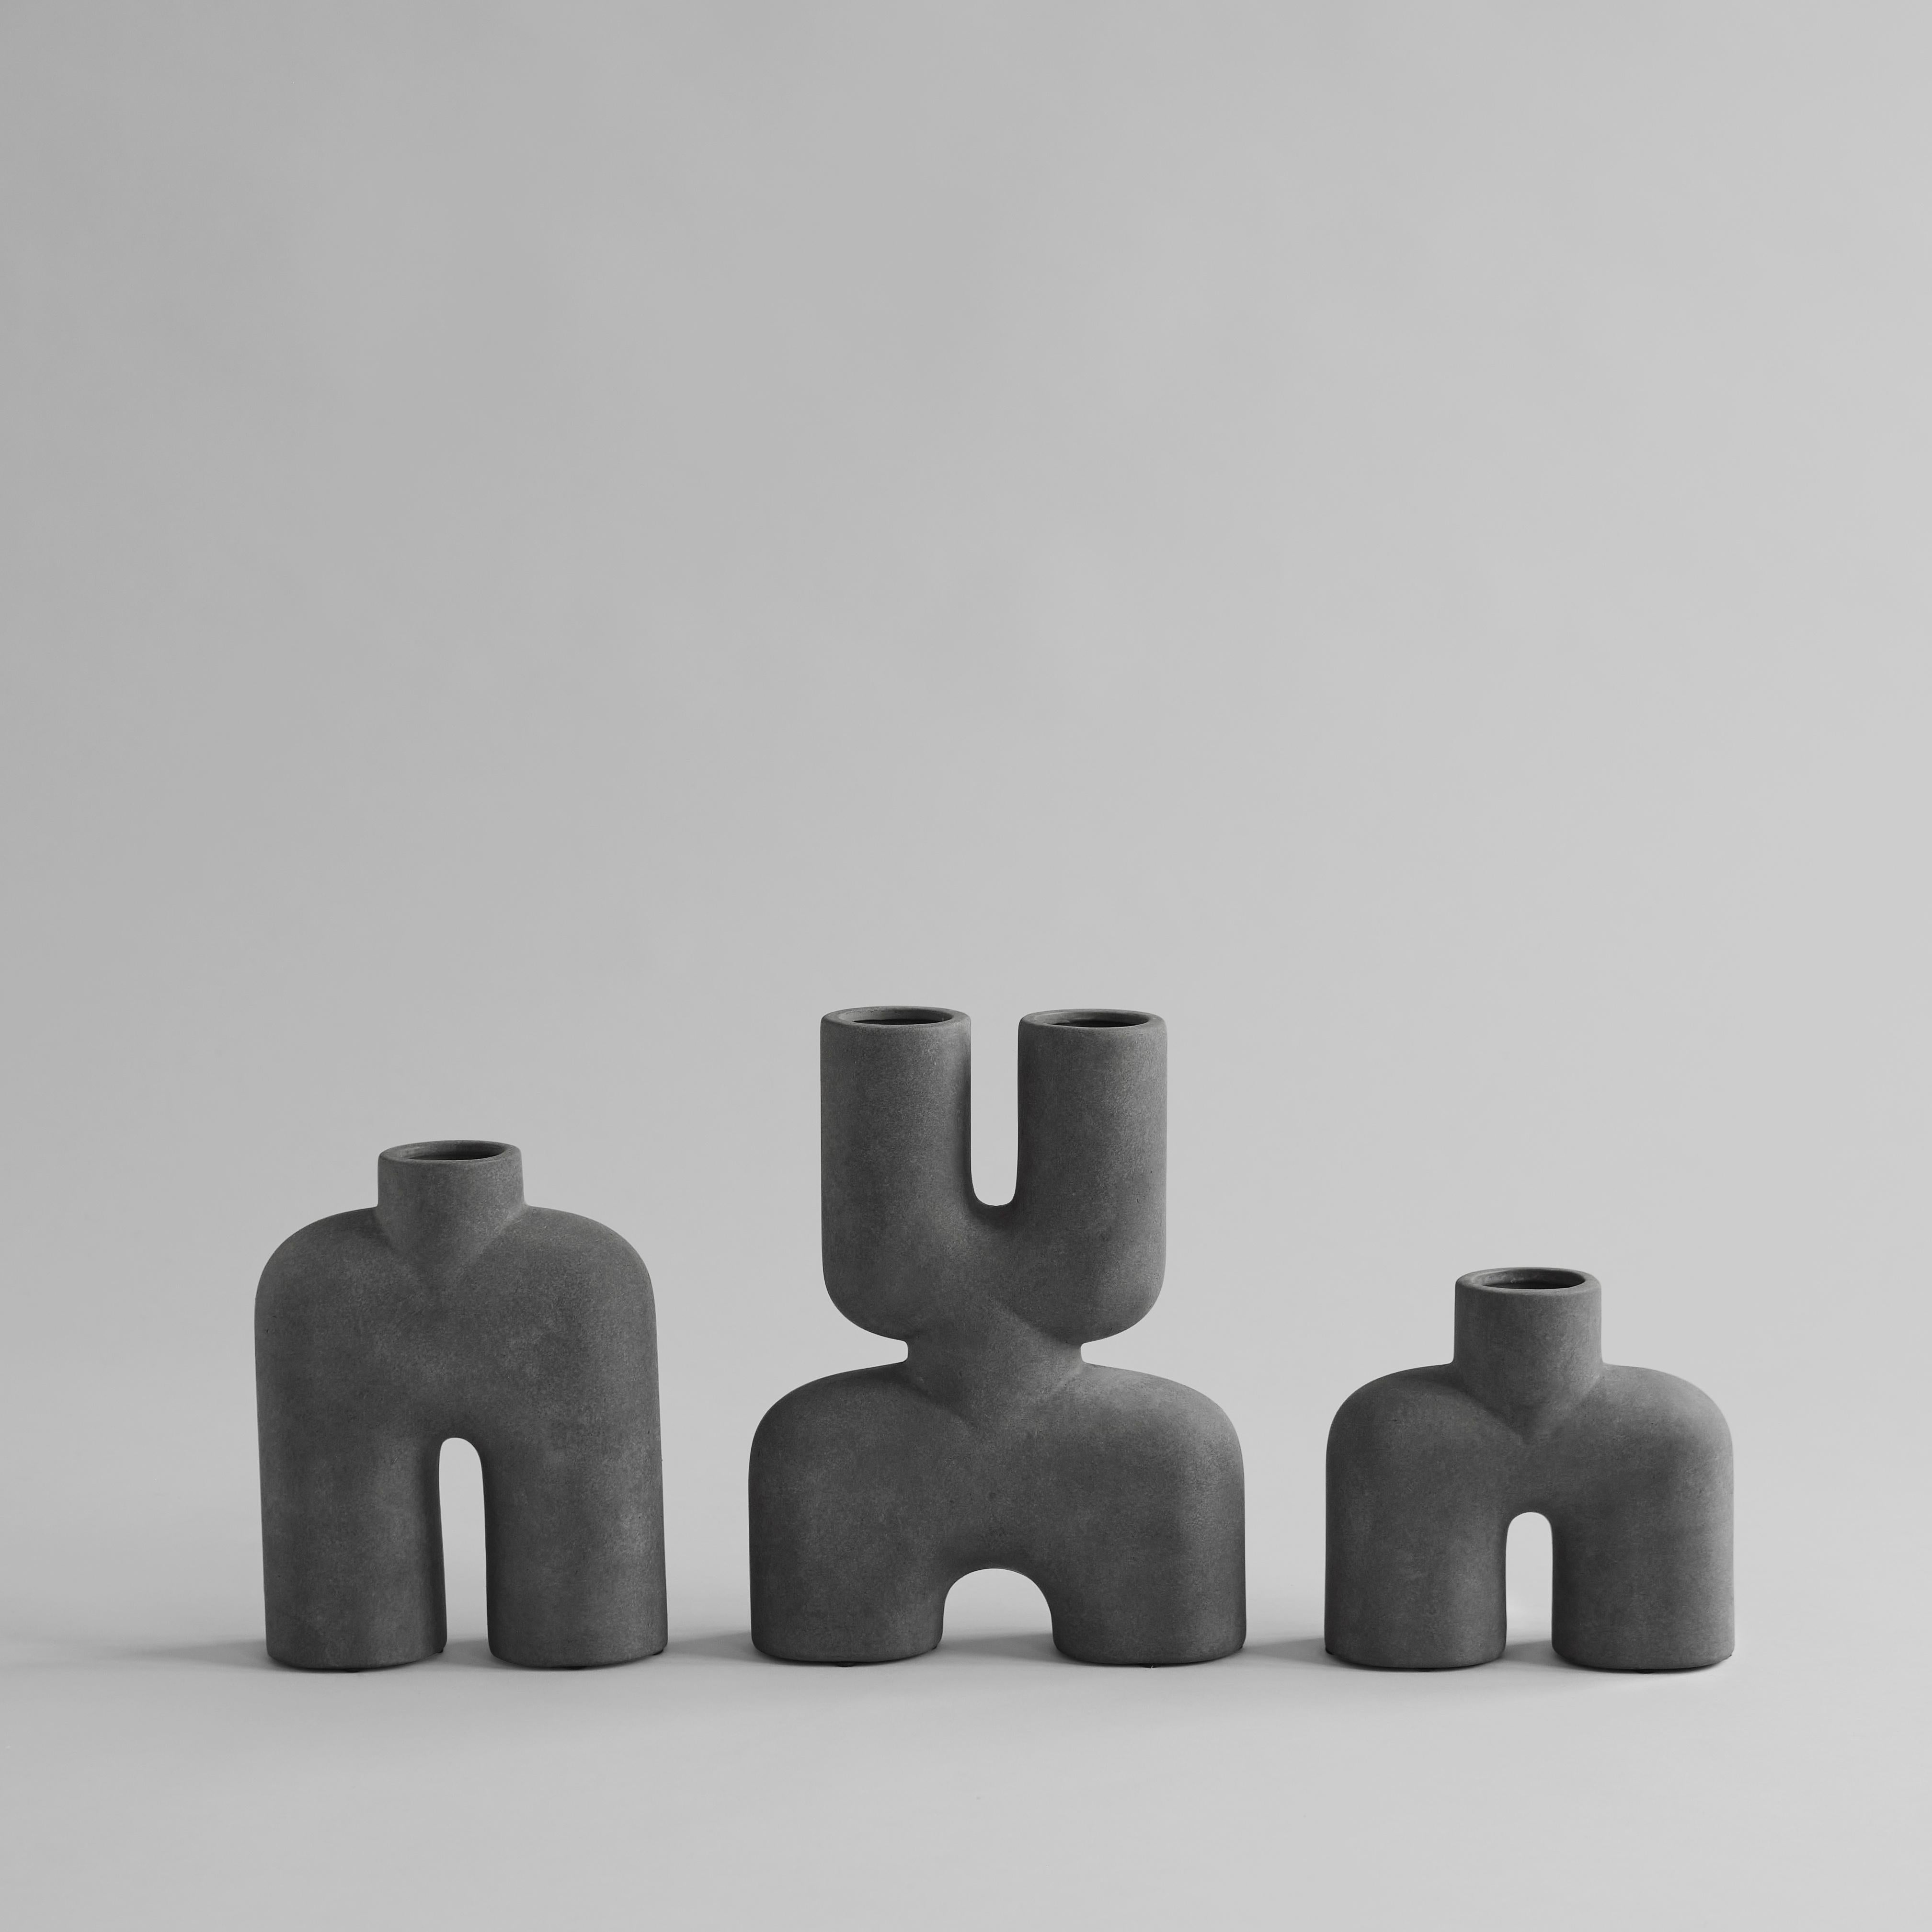 A set of 2 coffee cobra tall mini by 101 Copenhagen
Designed by Kristian Sofus Hansen & Tommy Hyldahl
Dimensions: L 18 / W 6,5 / H 23 CM
Materials: Ceramic

A tribute to the Cobra Arts Movement of the 1960s, the collection is the epitome of